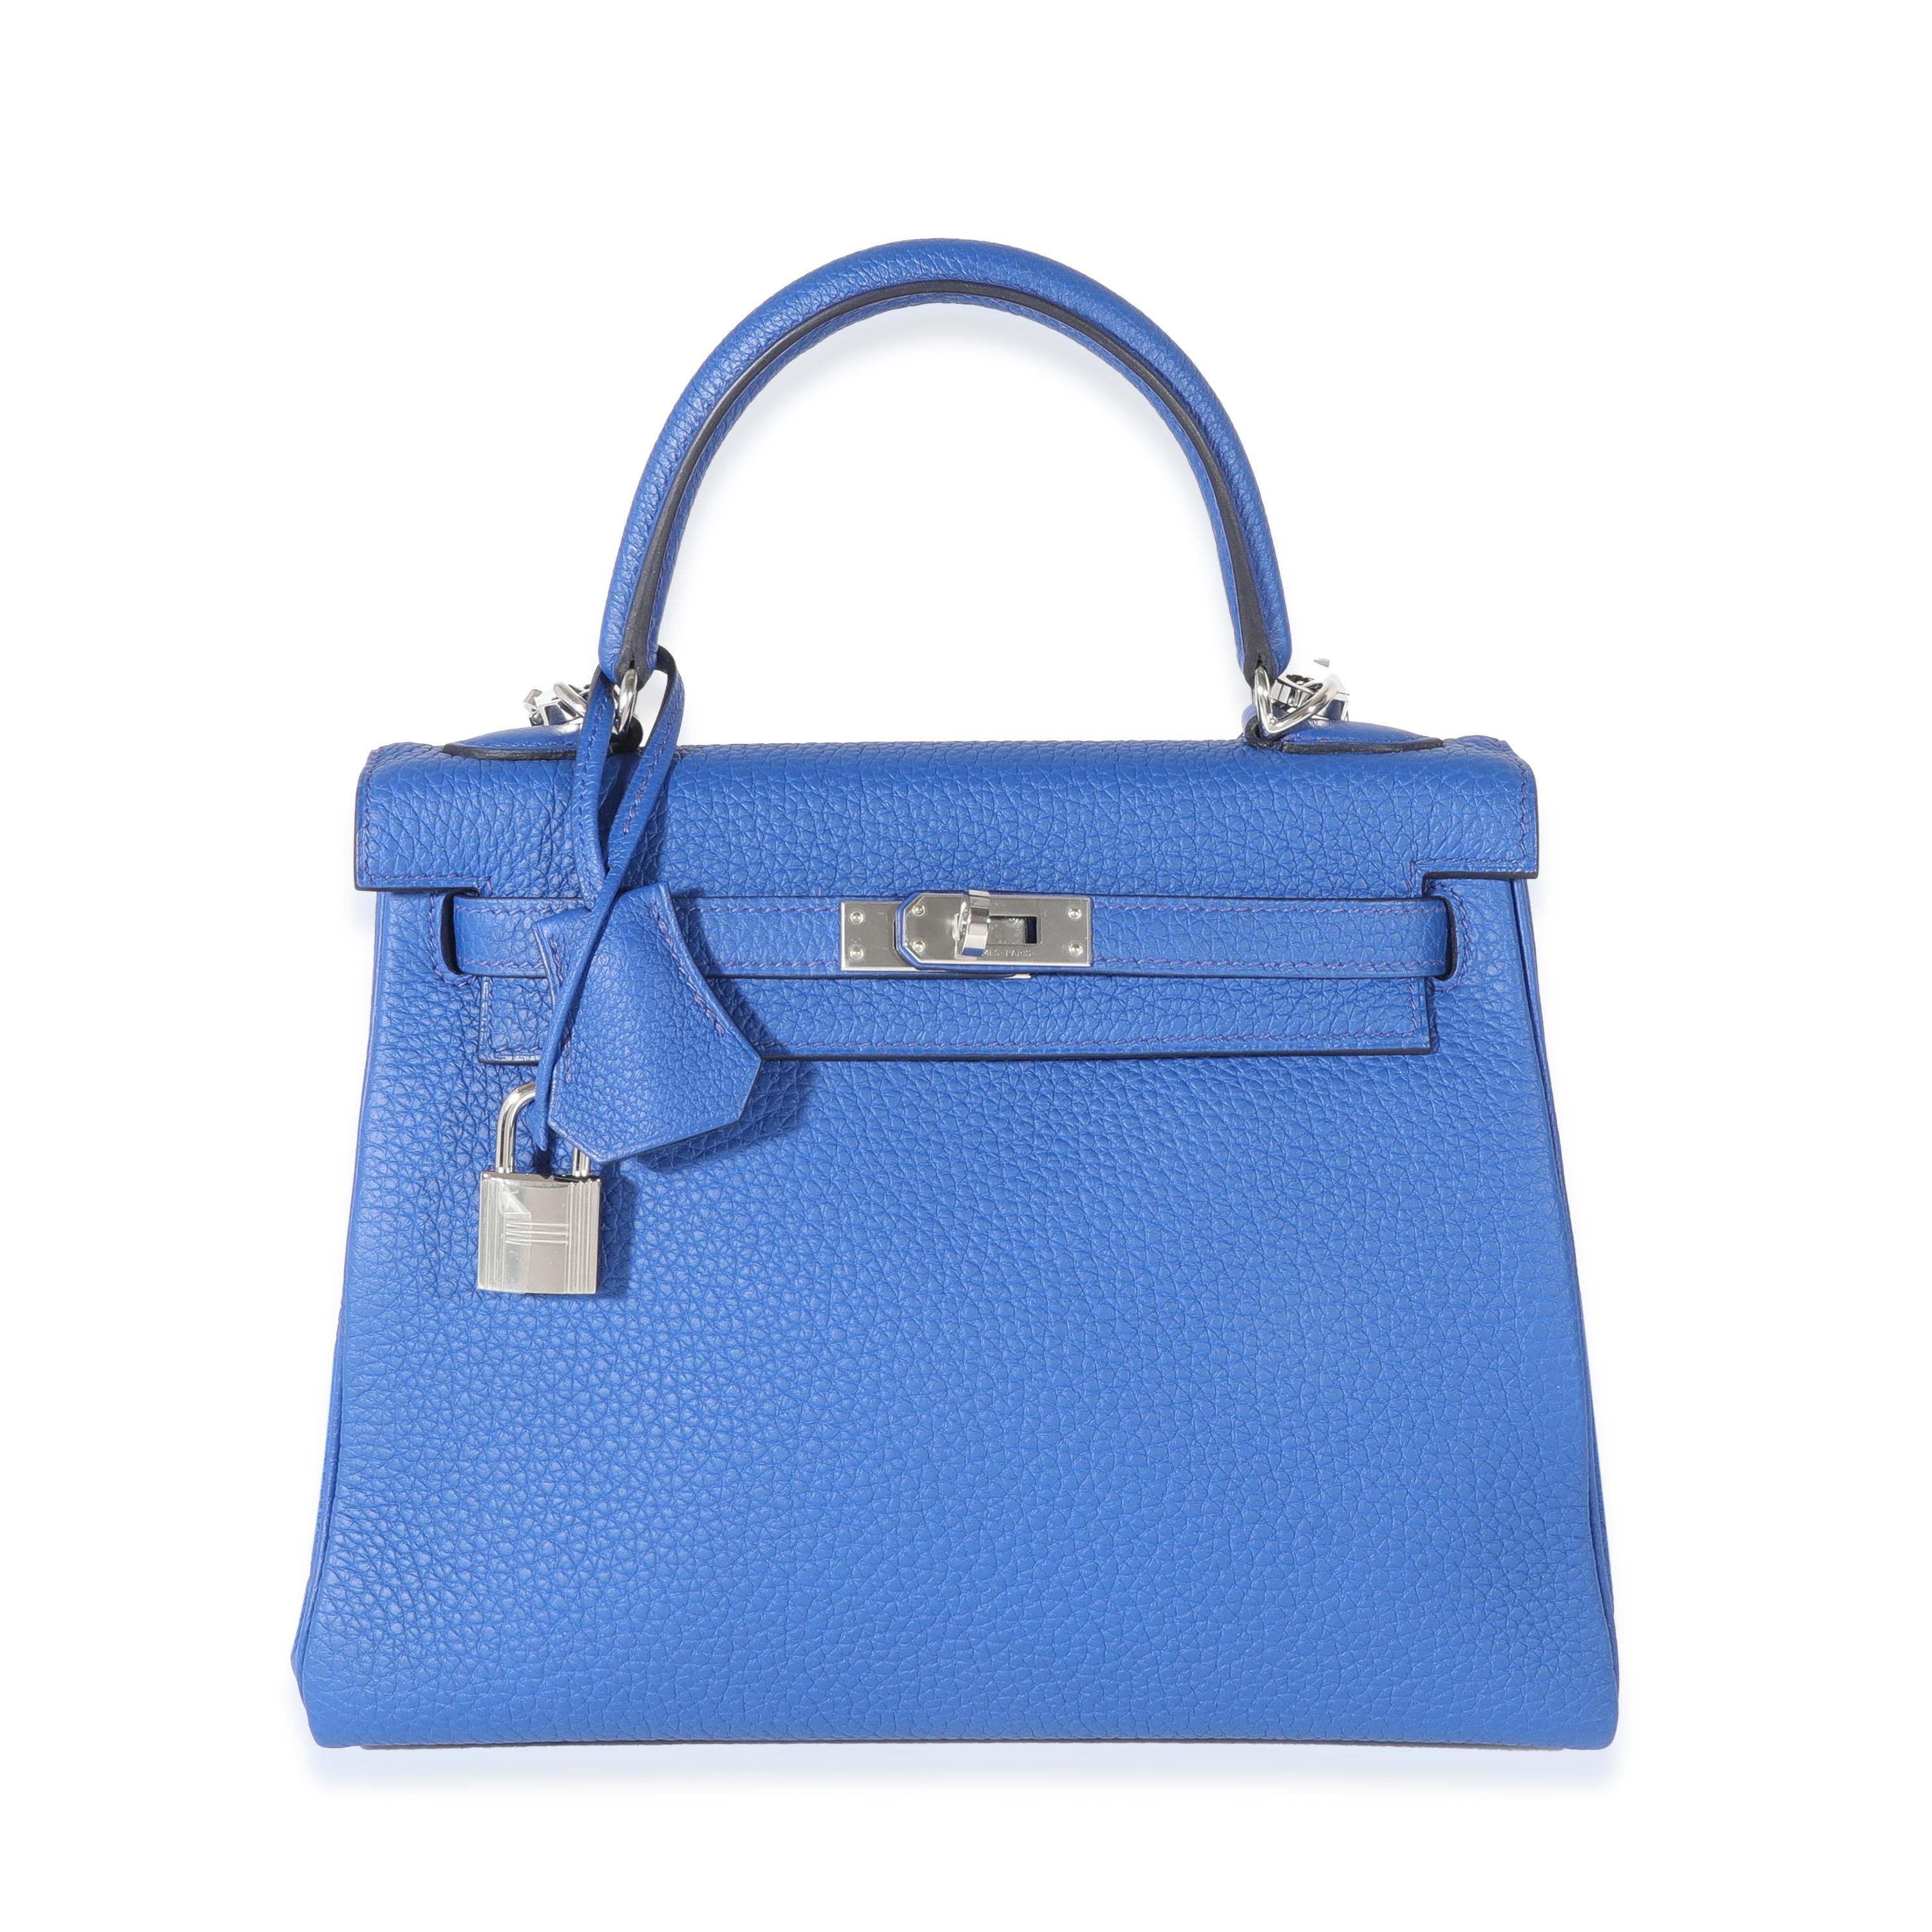 Listing Title: Hermes Bleu Royal Togo Kelly Retourne 25 PHW
SKU: 131406
Condition: Pre-owned 
Condition Description: Officially renamed in 1977, the Kelly tote bag from Hermès was originally called the Sac à Dépêches (which translates as ‘the